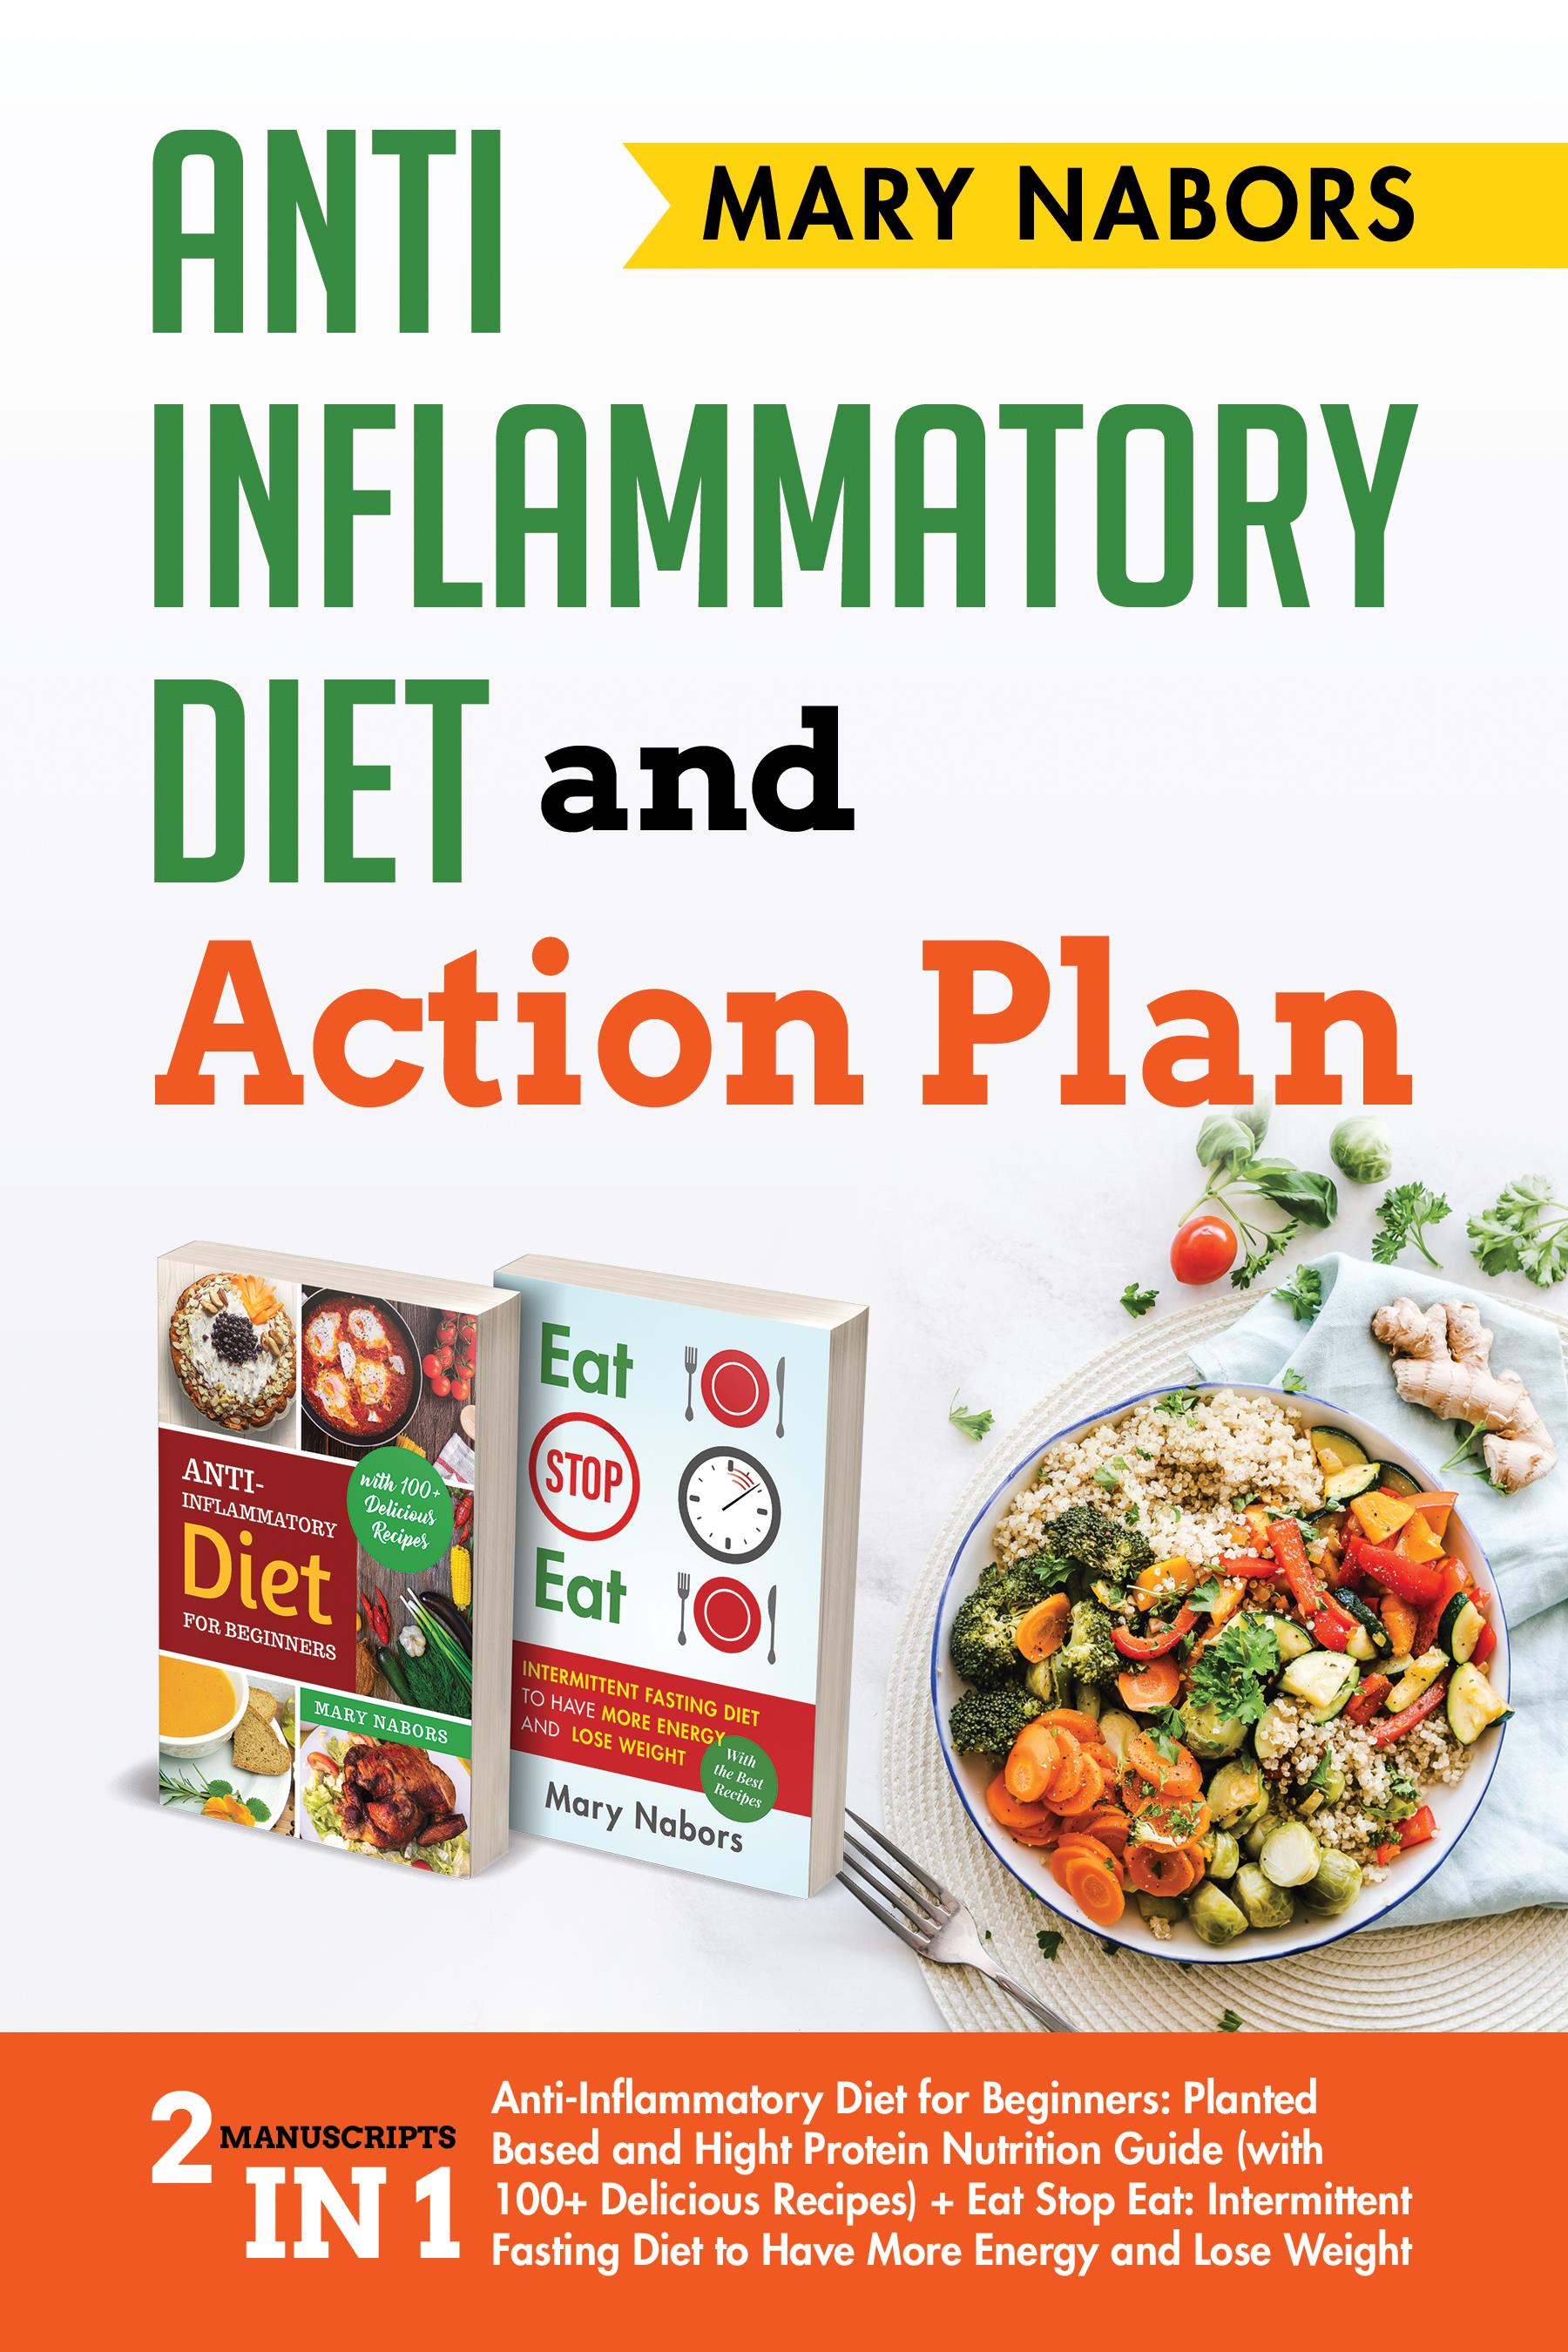 Eat Stop Eat. Anti-Inflammatory Diet for Beginners + Intermittent Fasting Diet  (with the Best Recipes)